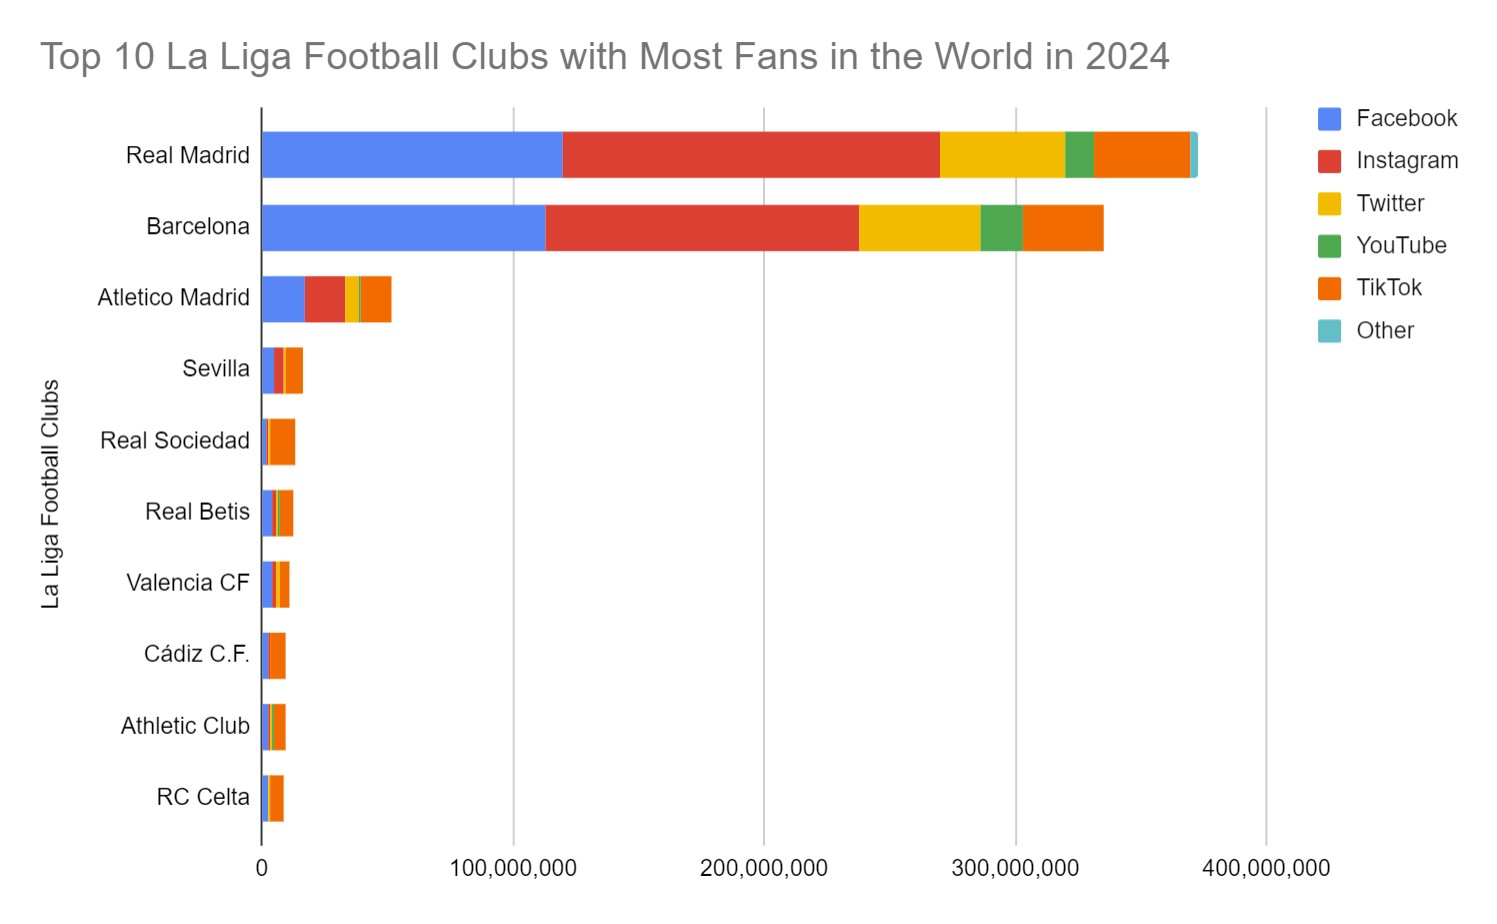 Top 10 La Liga Football Clubs with Most Fans in the World in 2024